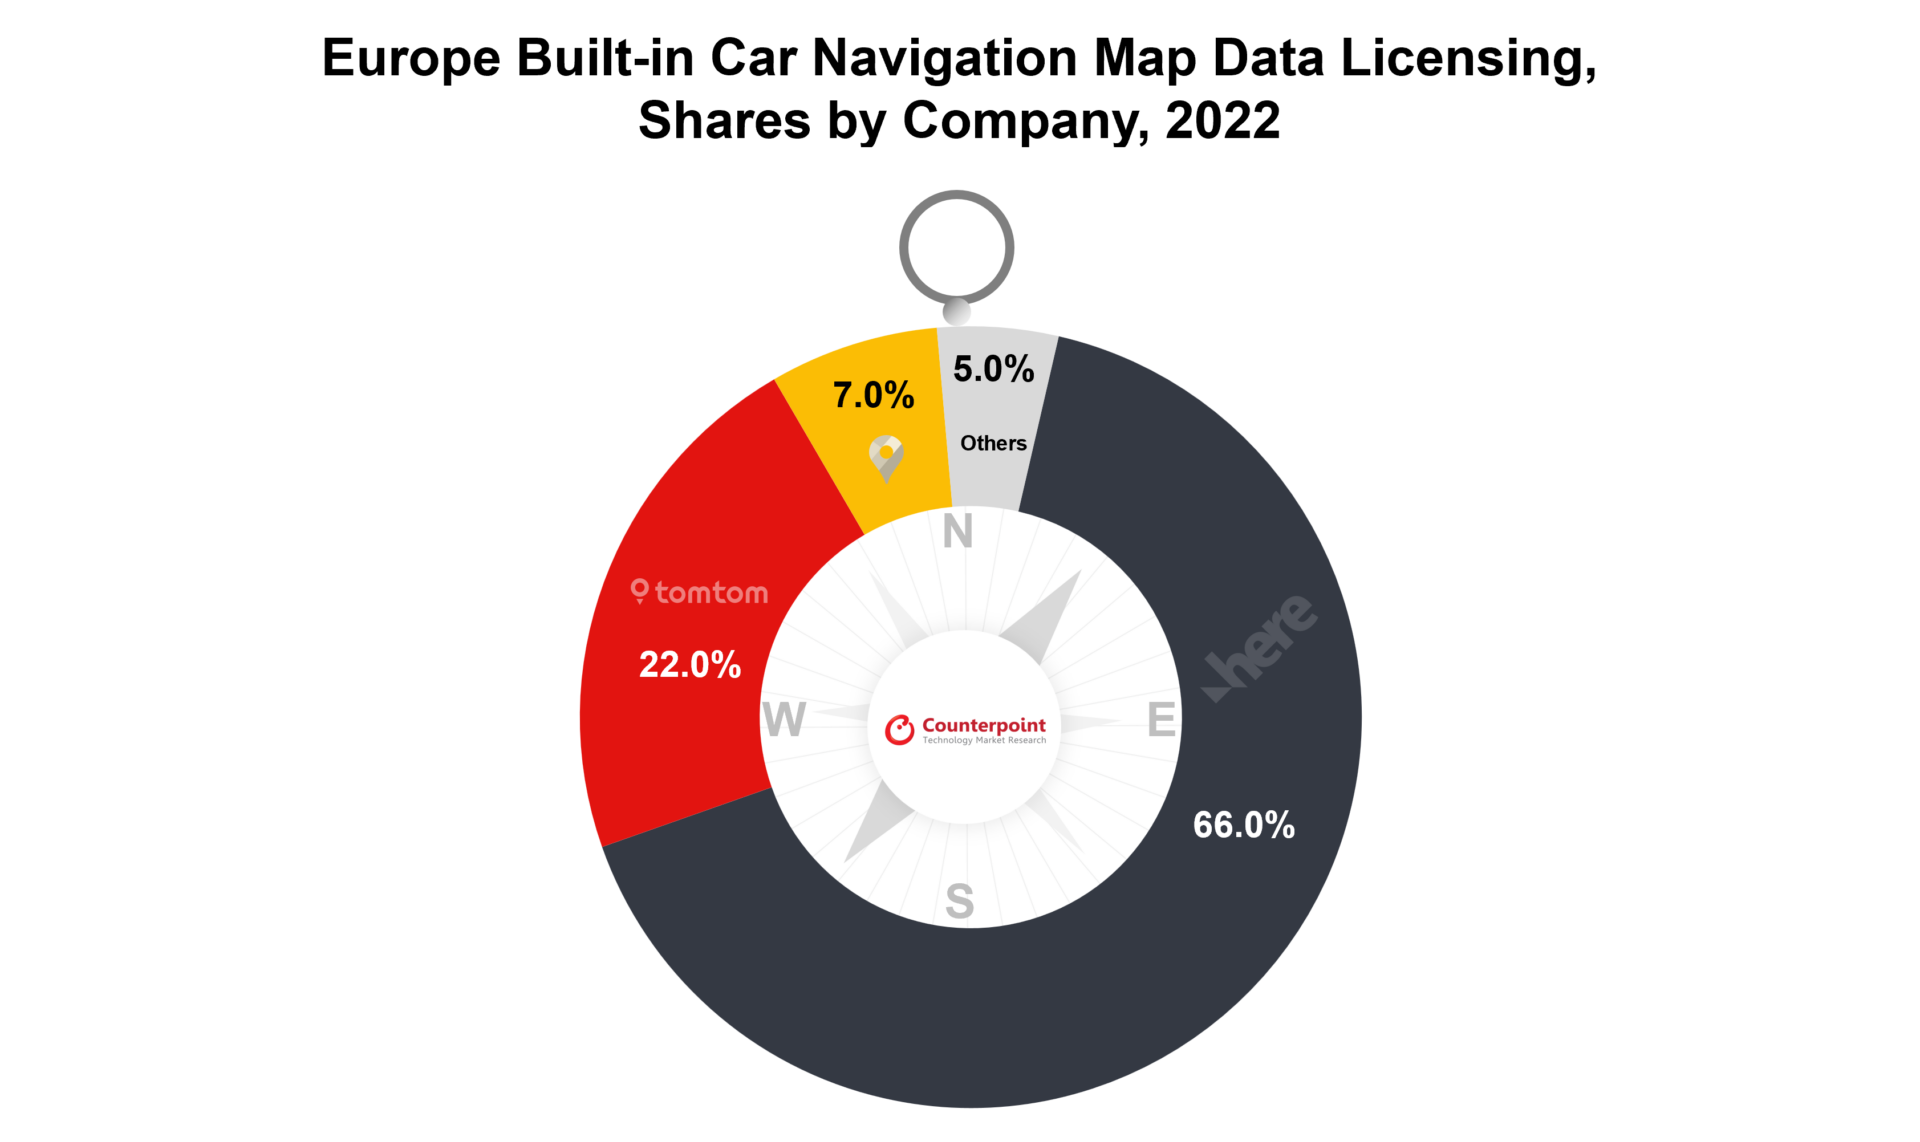 A chart Showing Europe Built-in Car Navigation & Map Data Licensing Shares By Company 2022